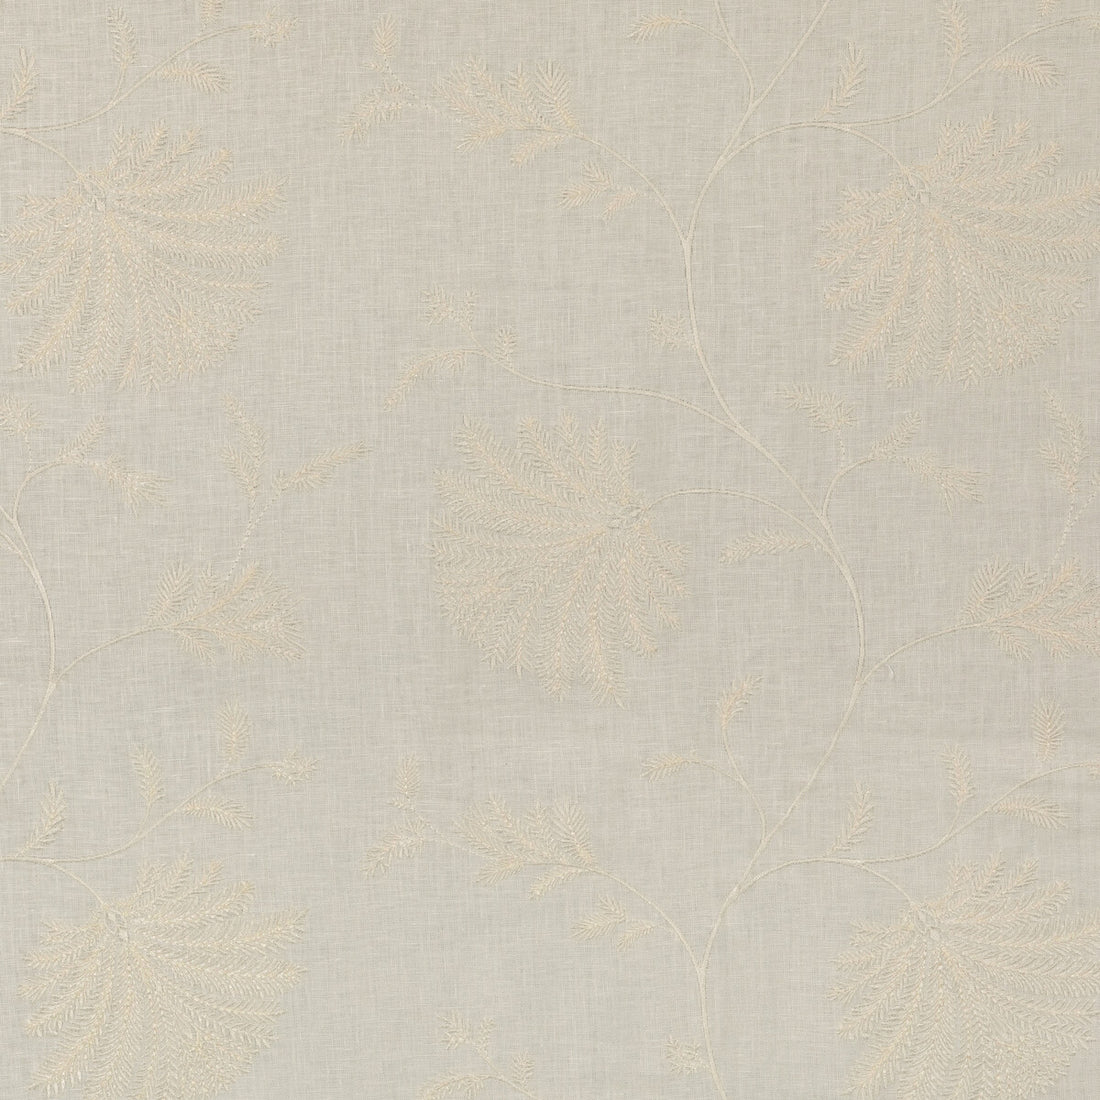 Maelle Emb fabric in ivory color - pattern 8023116.1.0 - by Brunschwig &amp; Fils in the Anduze Embroideries collection